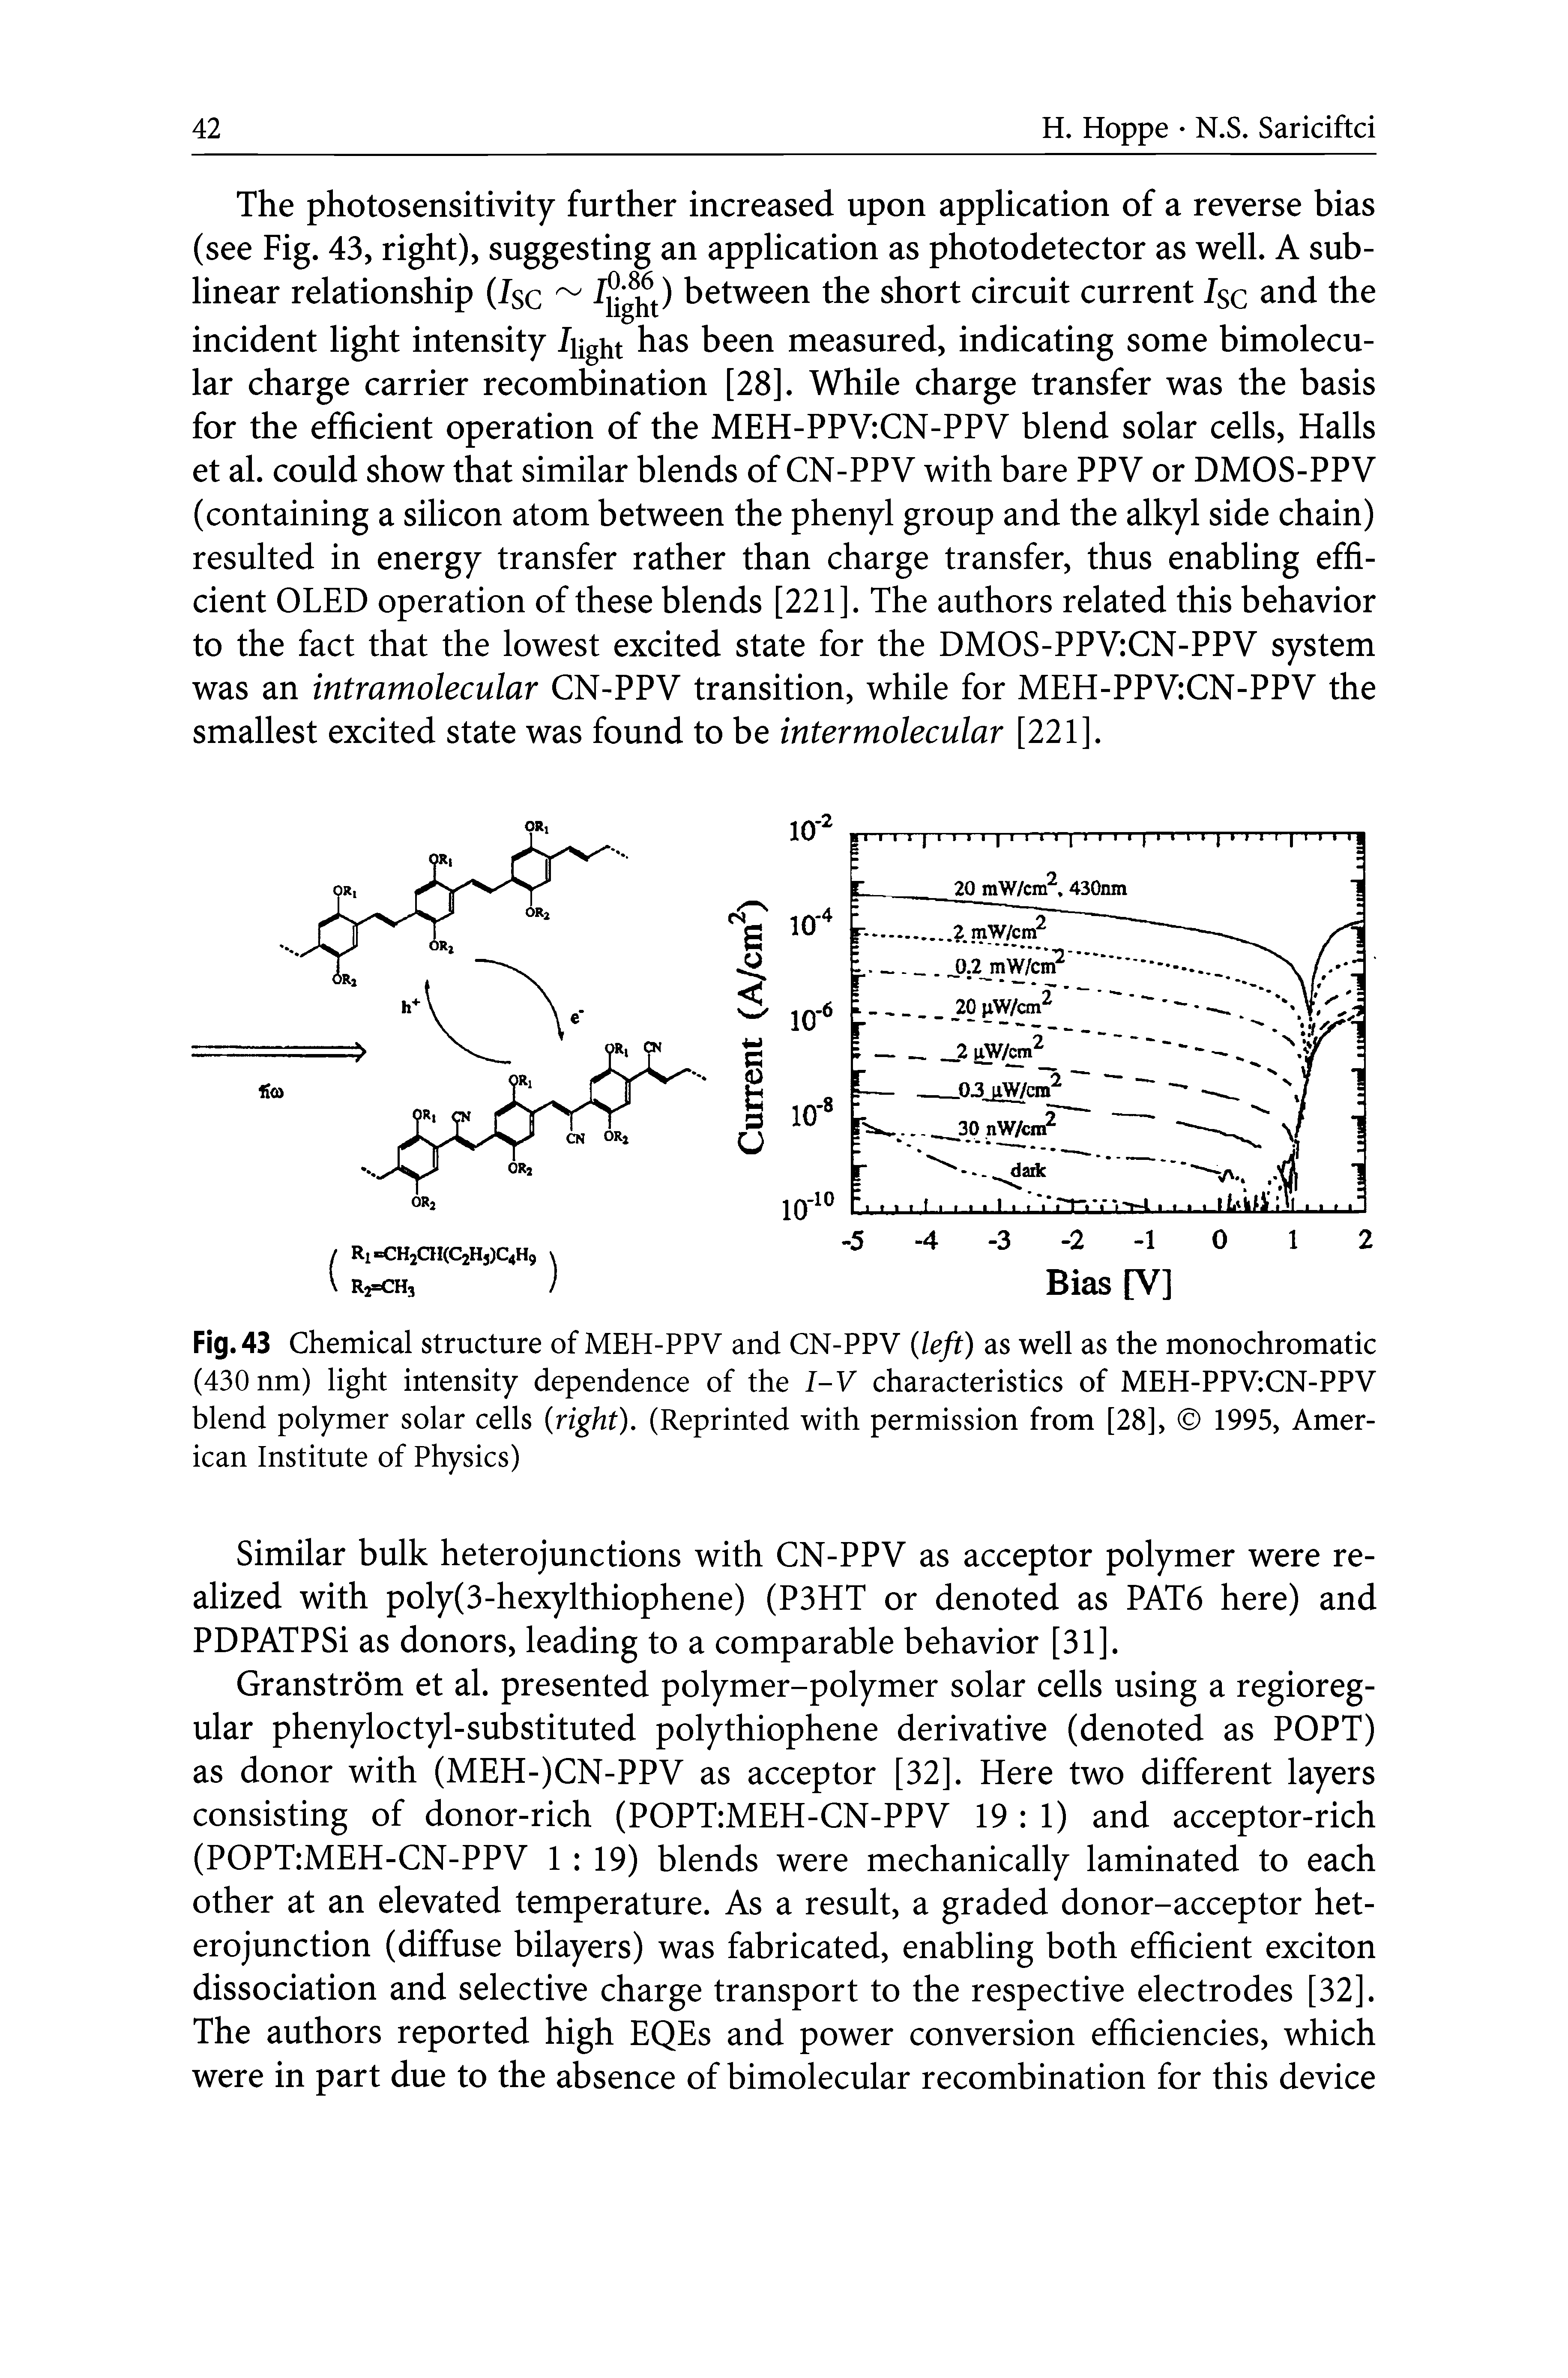 Fig. 43 Chemical structure of MEH-PPV and CN-PPV left) as well as the monochromatic (430 nm) light intensity dependence of the I-V characteristics of MEH-PPV CN-PPV blend polymer solar cells right). (Reprinted with permission from [28], 1995, American Institute of Physics)...